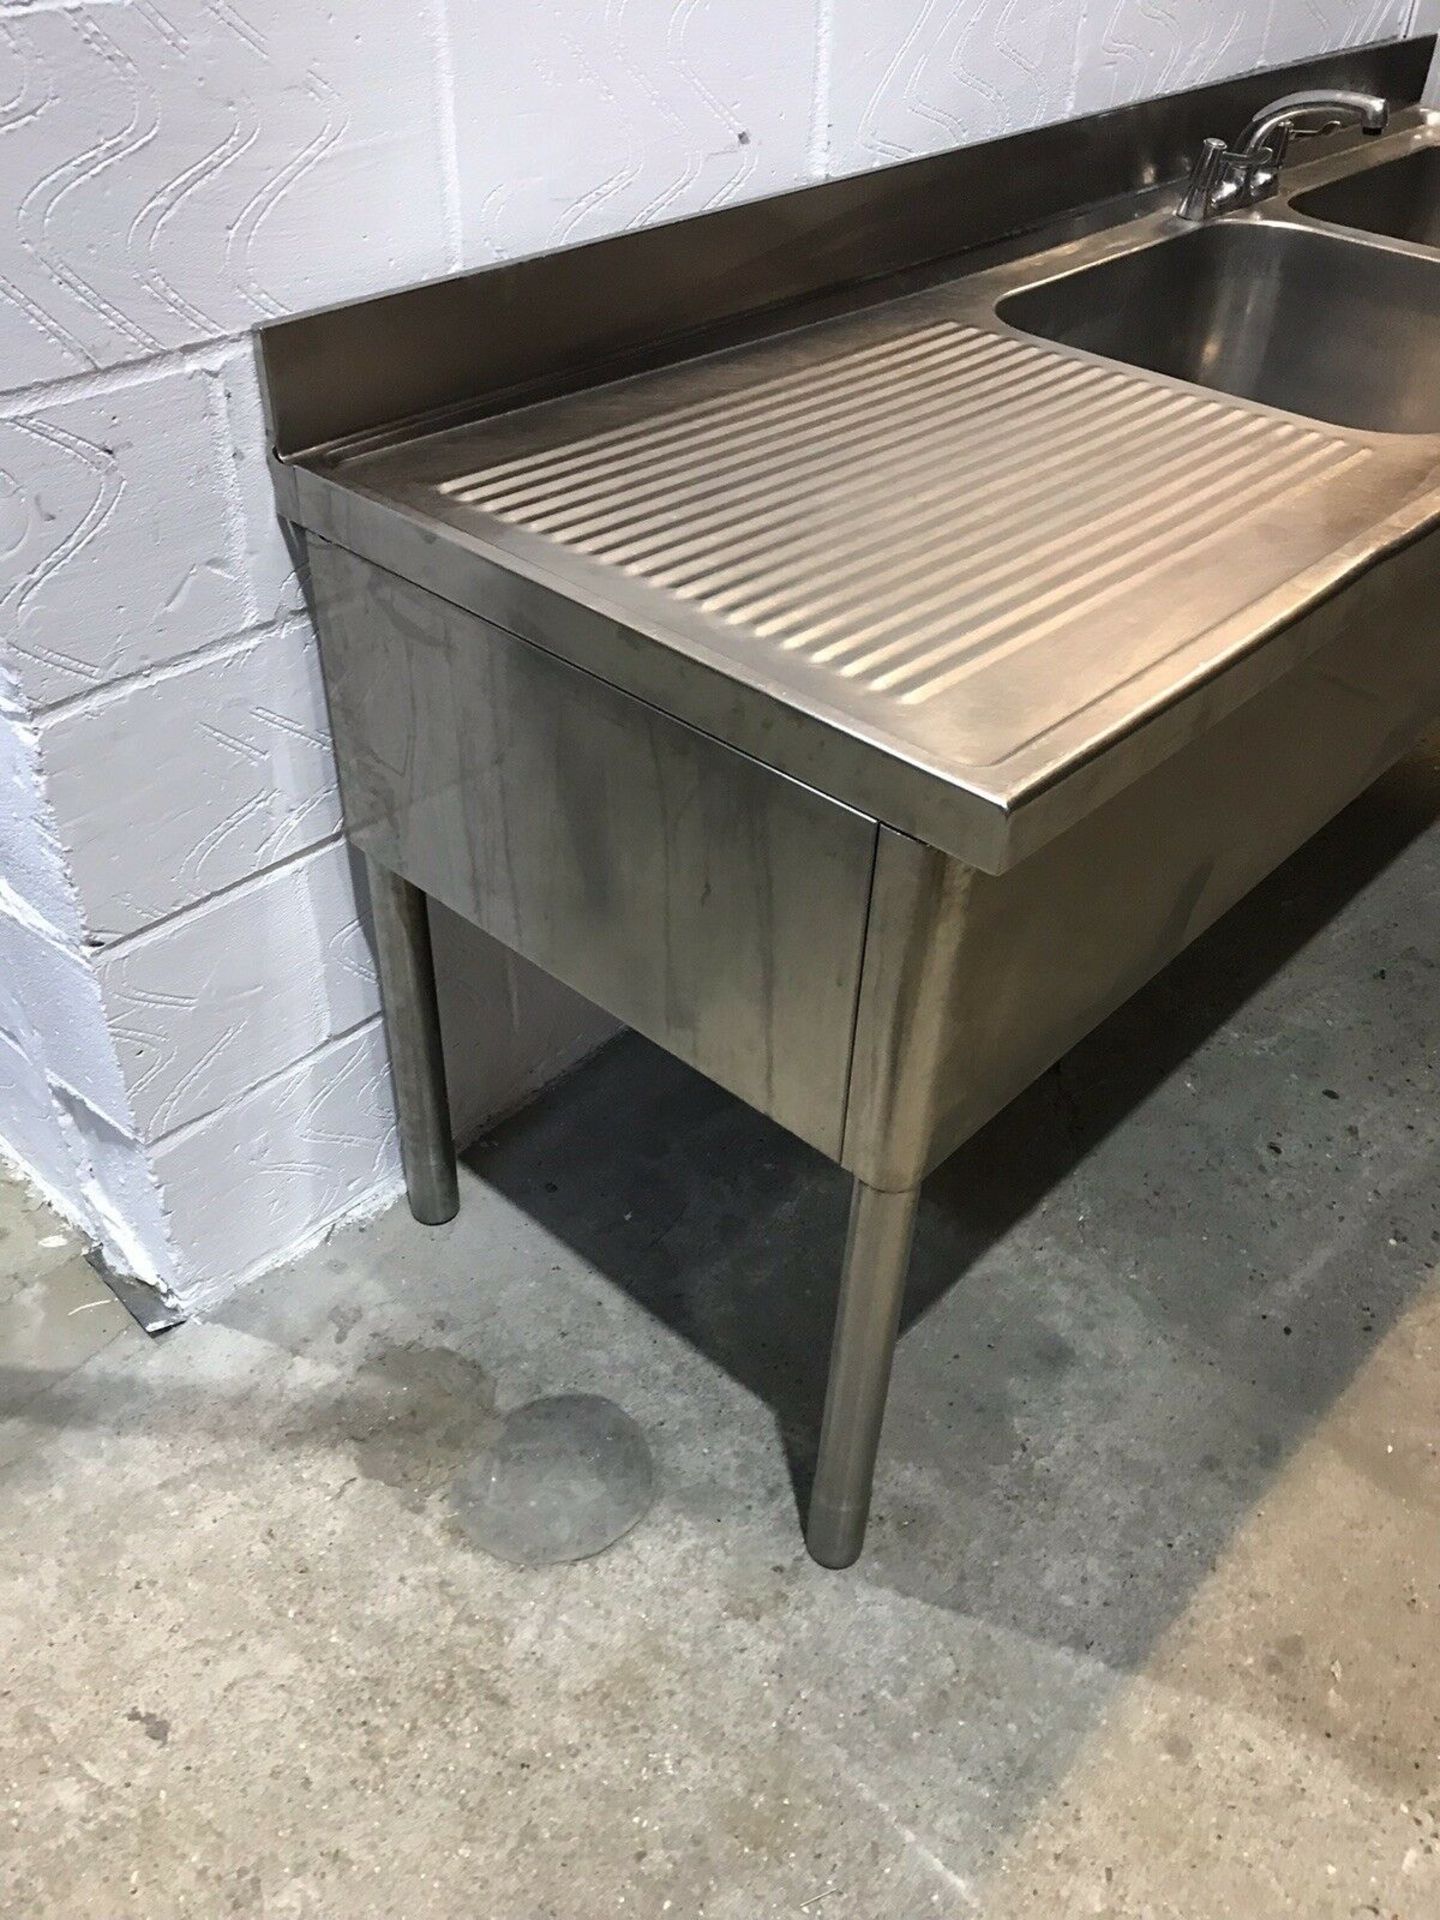 Stainless Steel Double Bowl Sink With Lefthand Drainer, Upstand and Shelf - Image 2 of 6